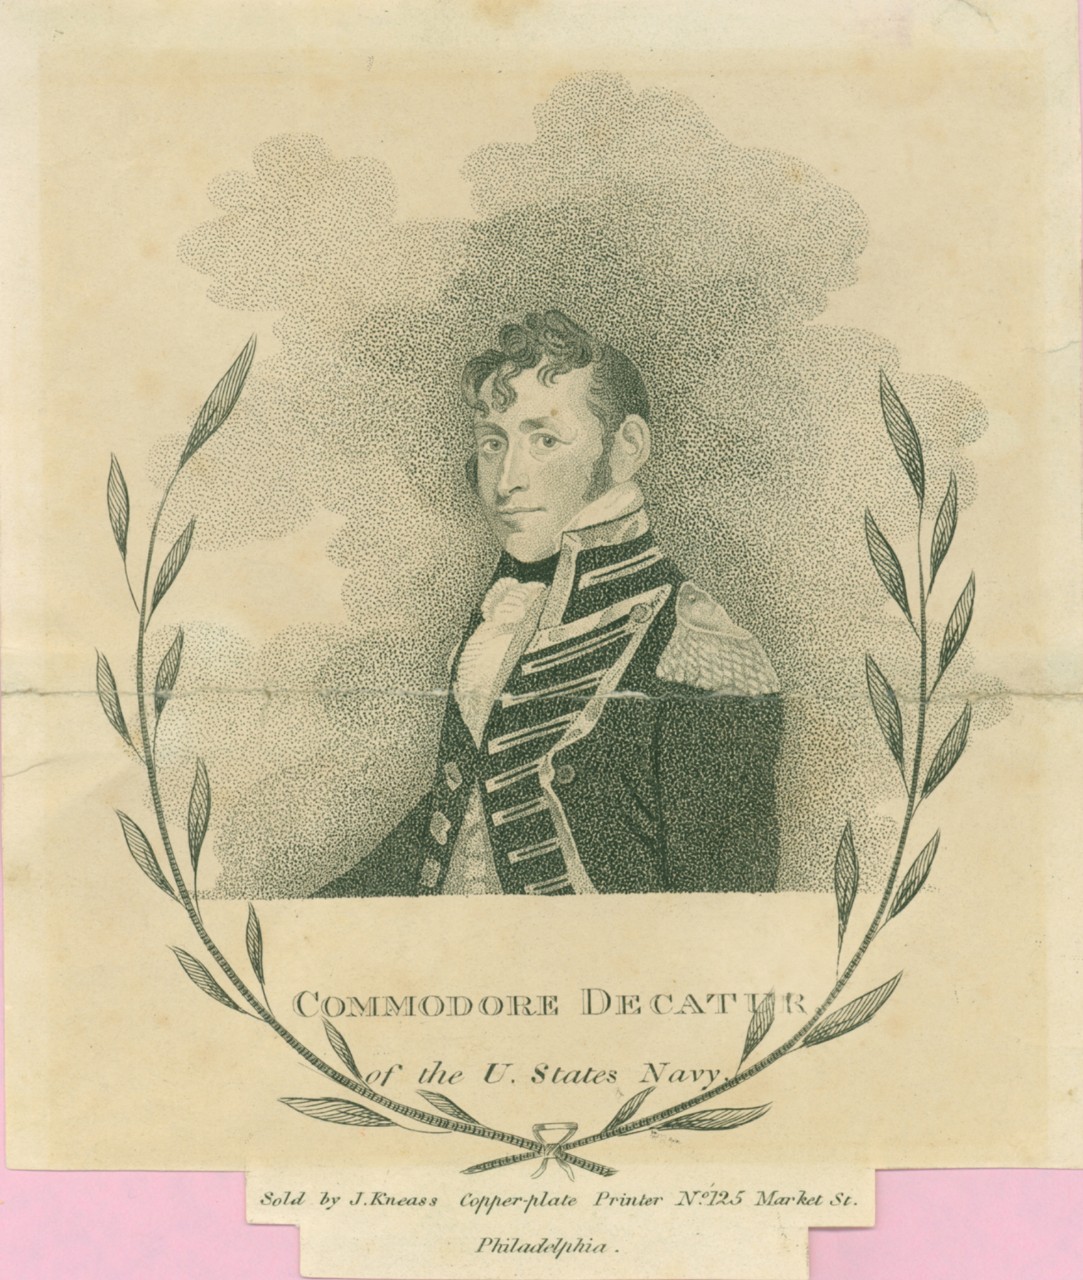 A 3/4 view portrait of Stephen Decatur with laurel branches for a border.The text is "Sold by J Kineass Copper Plate Printer No. 125 Market Street Philadelphia."